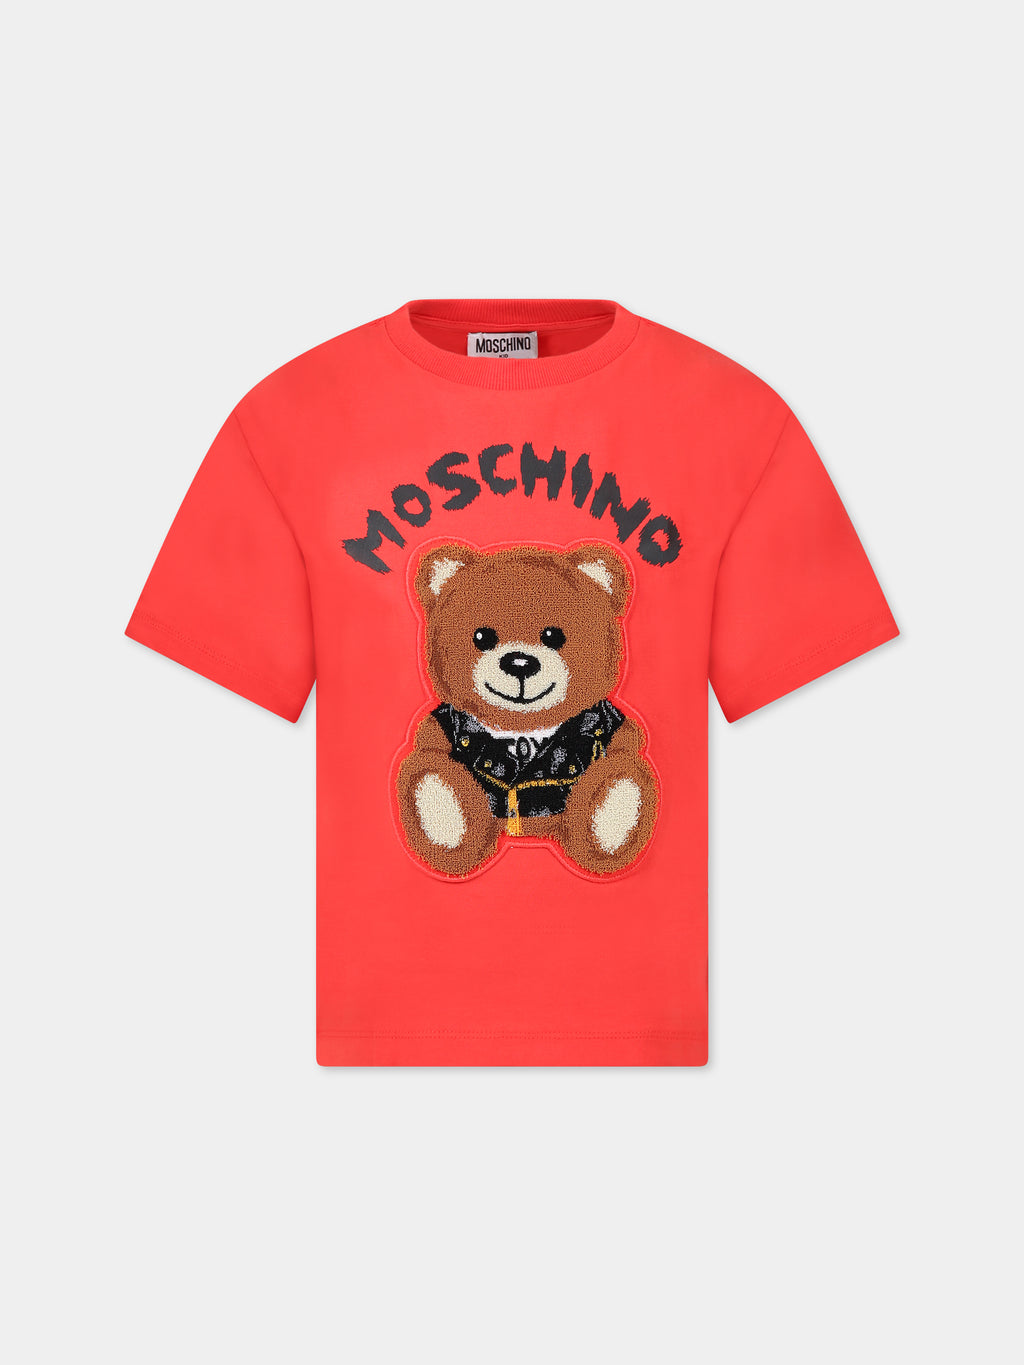 Red t-shirt for kids with logo and Teddy Bear